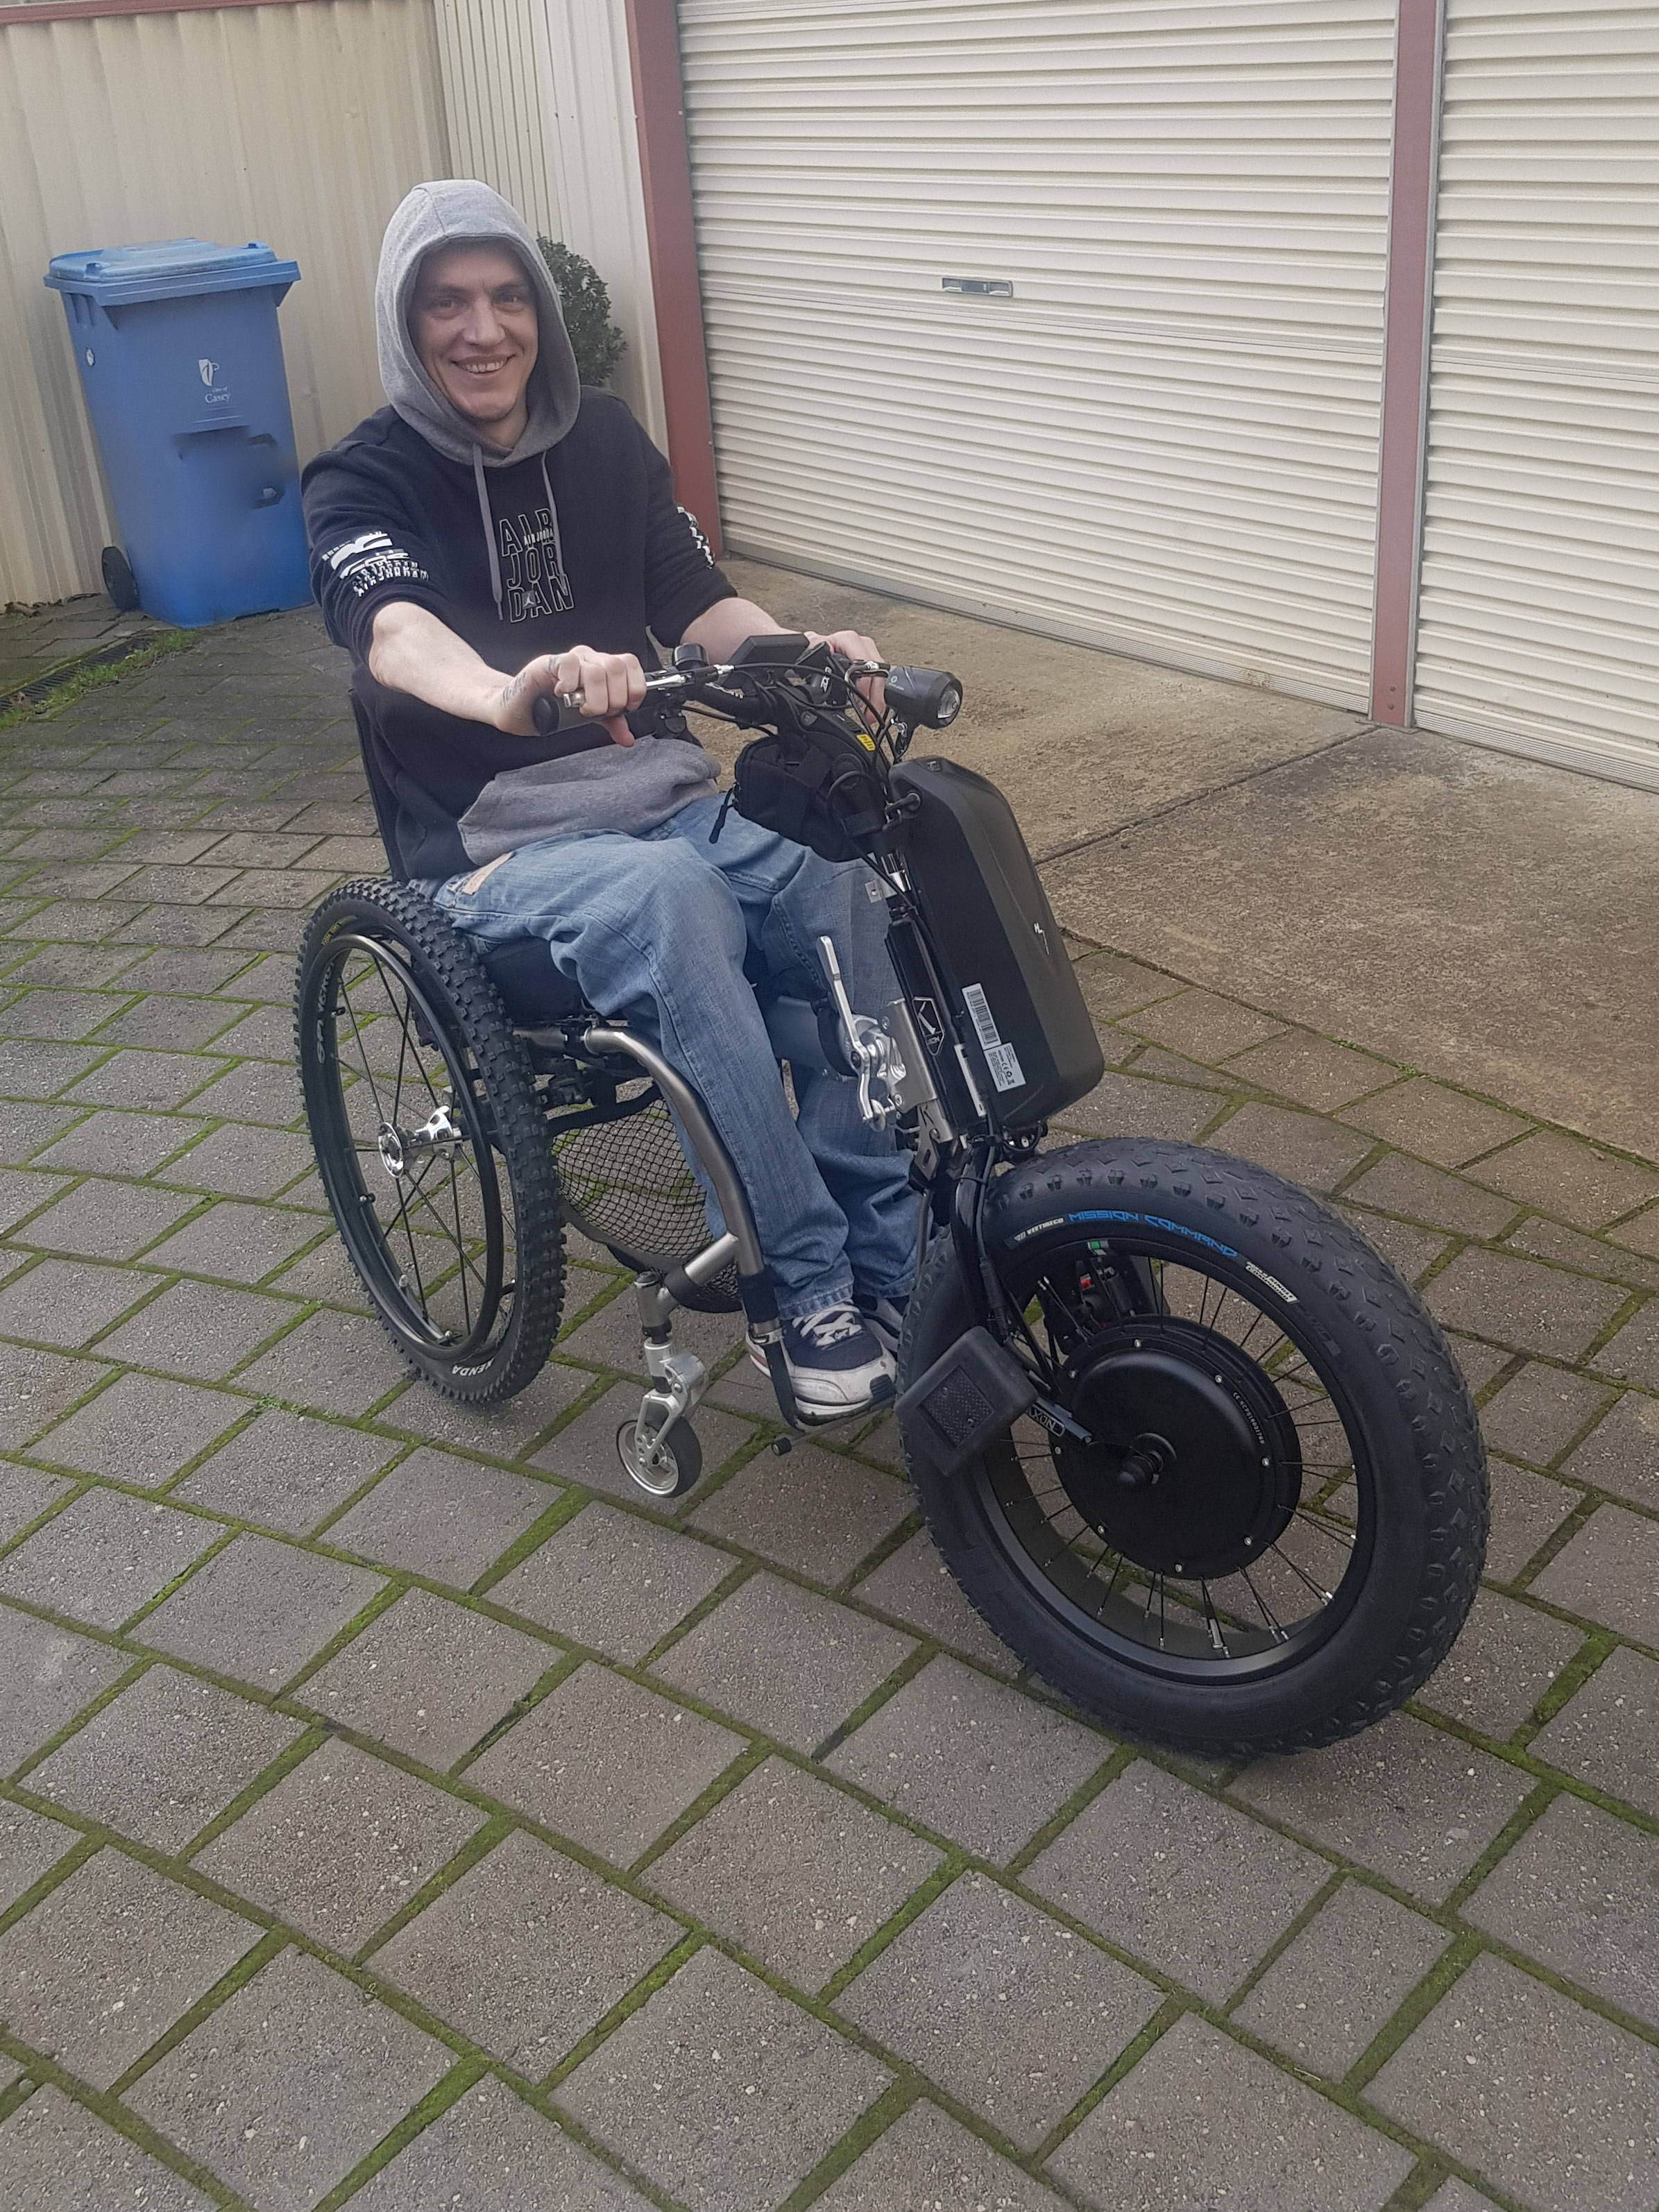 Ed in his wheelchair with the Klaxon Monster attachment, huge smile on his face